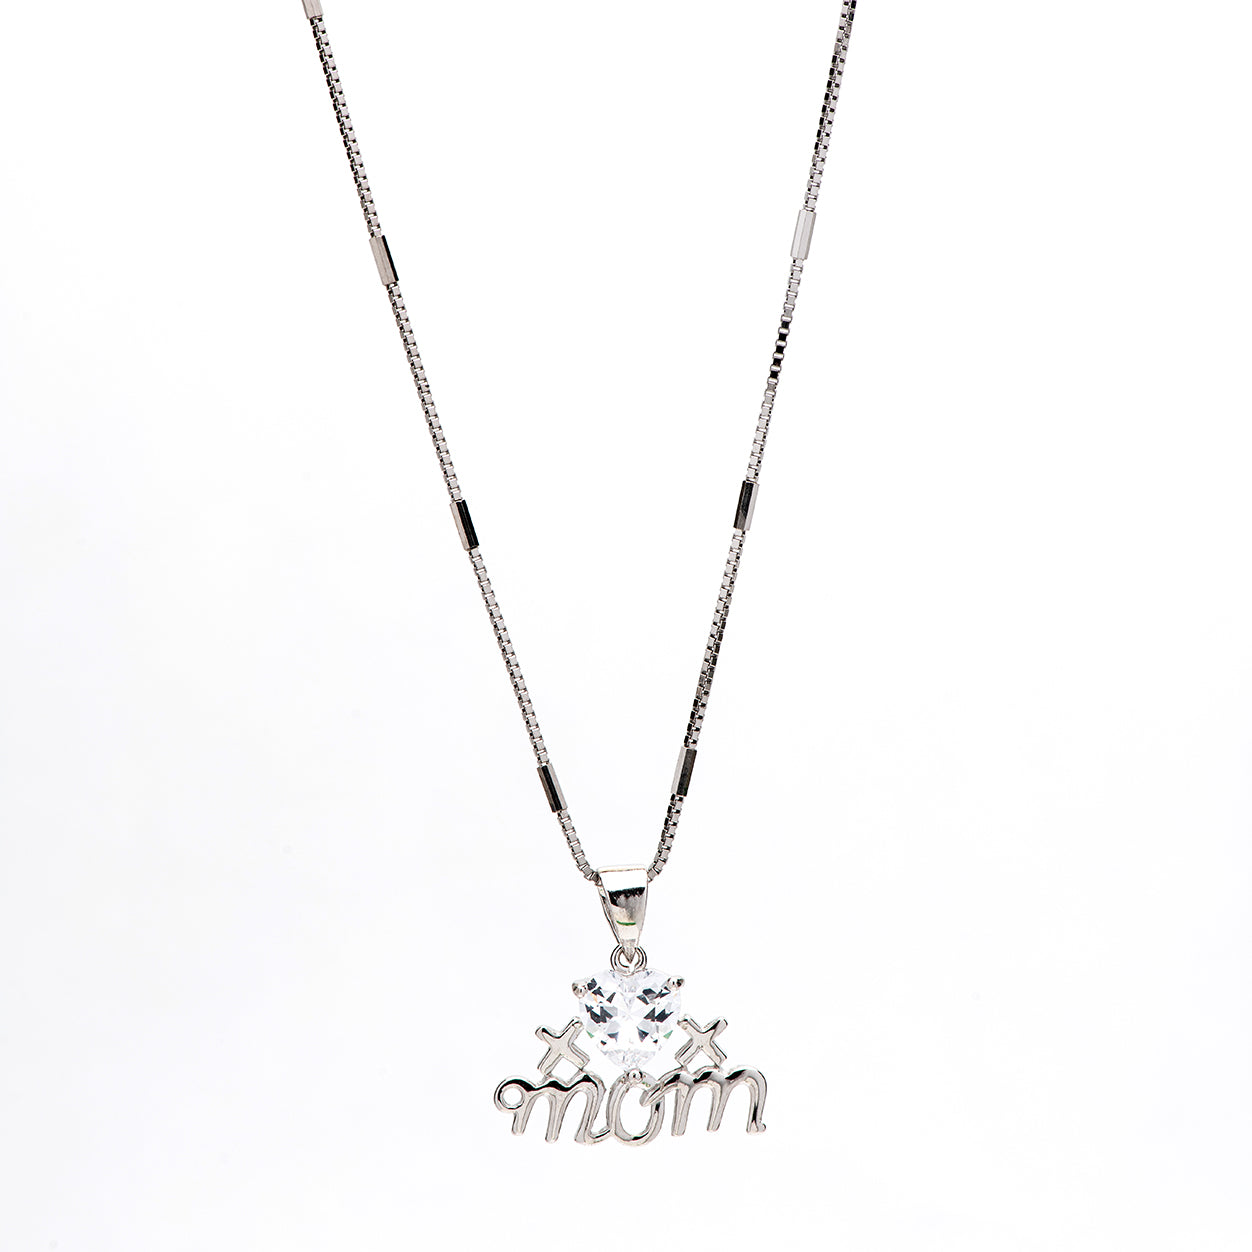 DK-925-465 sterling silver necklace XOX MOM